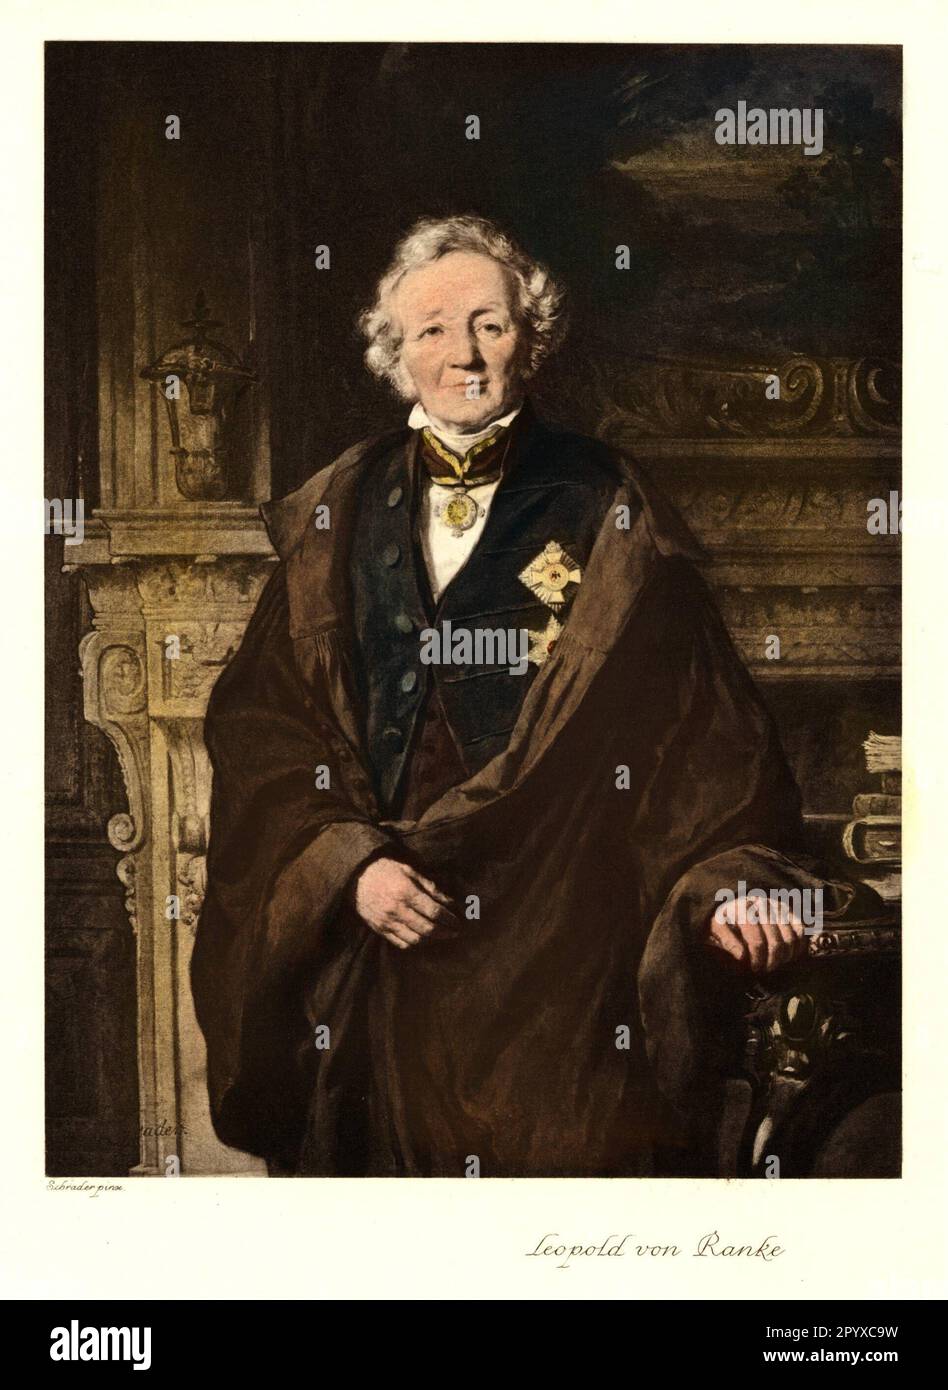 Leopold von (from 1865) Ranke (1795-1886), German historian. Ranke played a decisive role in the emergence of modern historical science (historical method).nPainting by Schrader. Photo: Heliogravure, Corpus Imaginum, Hanfstaengl Collection. [automated translation] Stock Photo